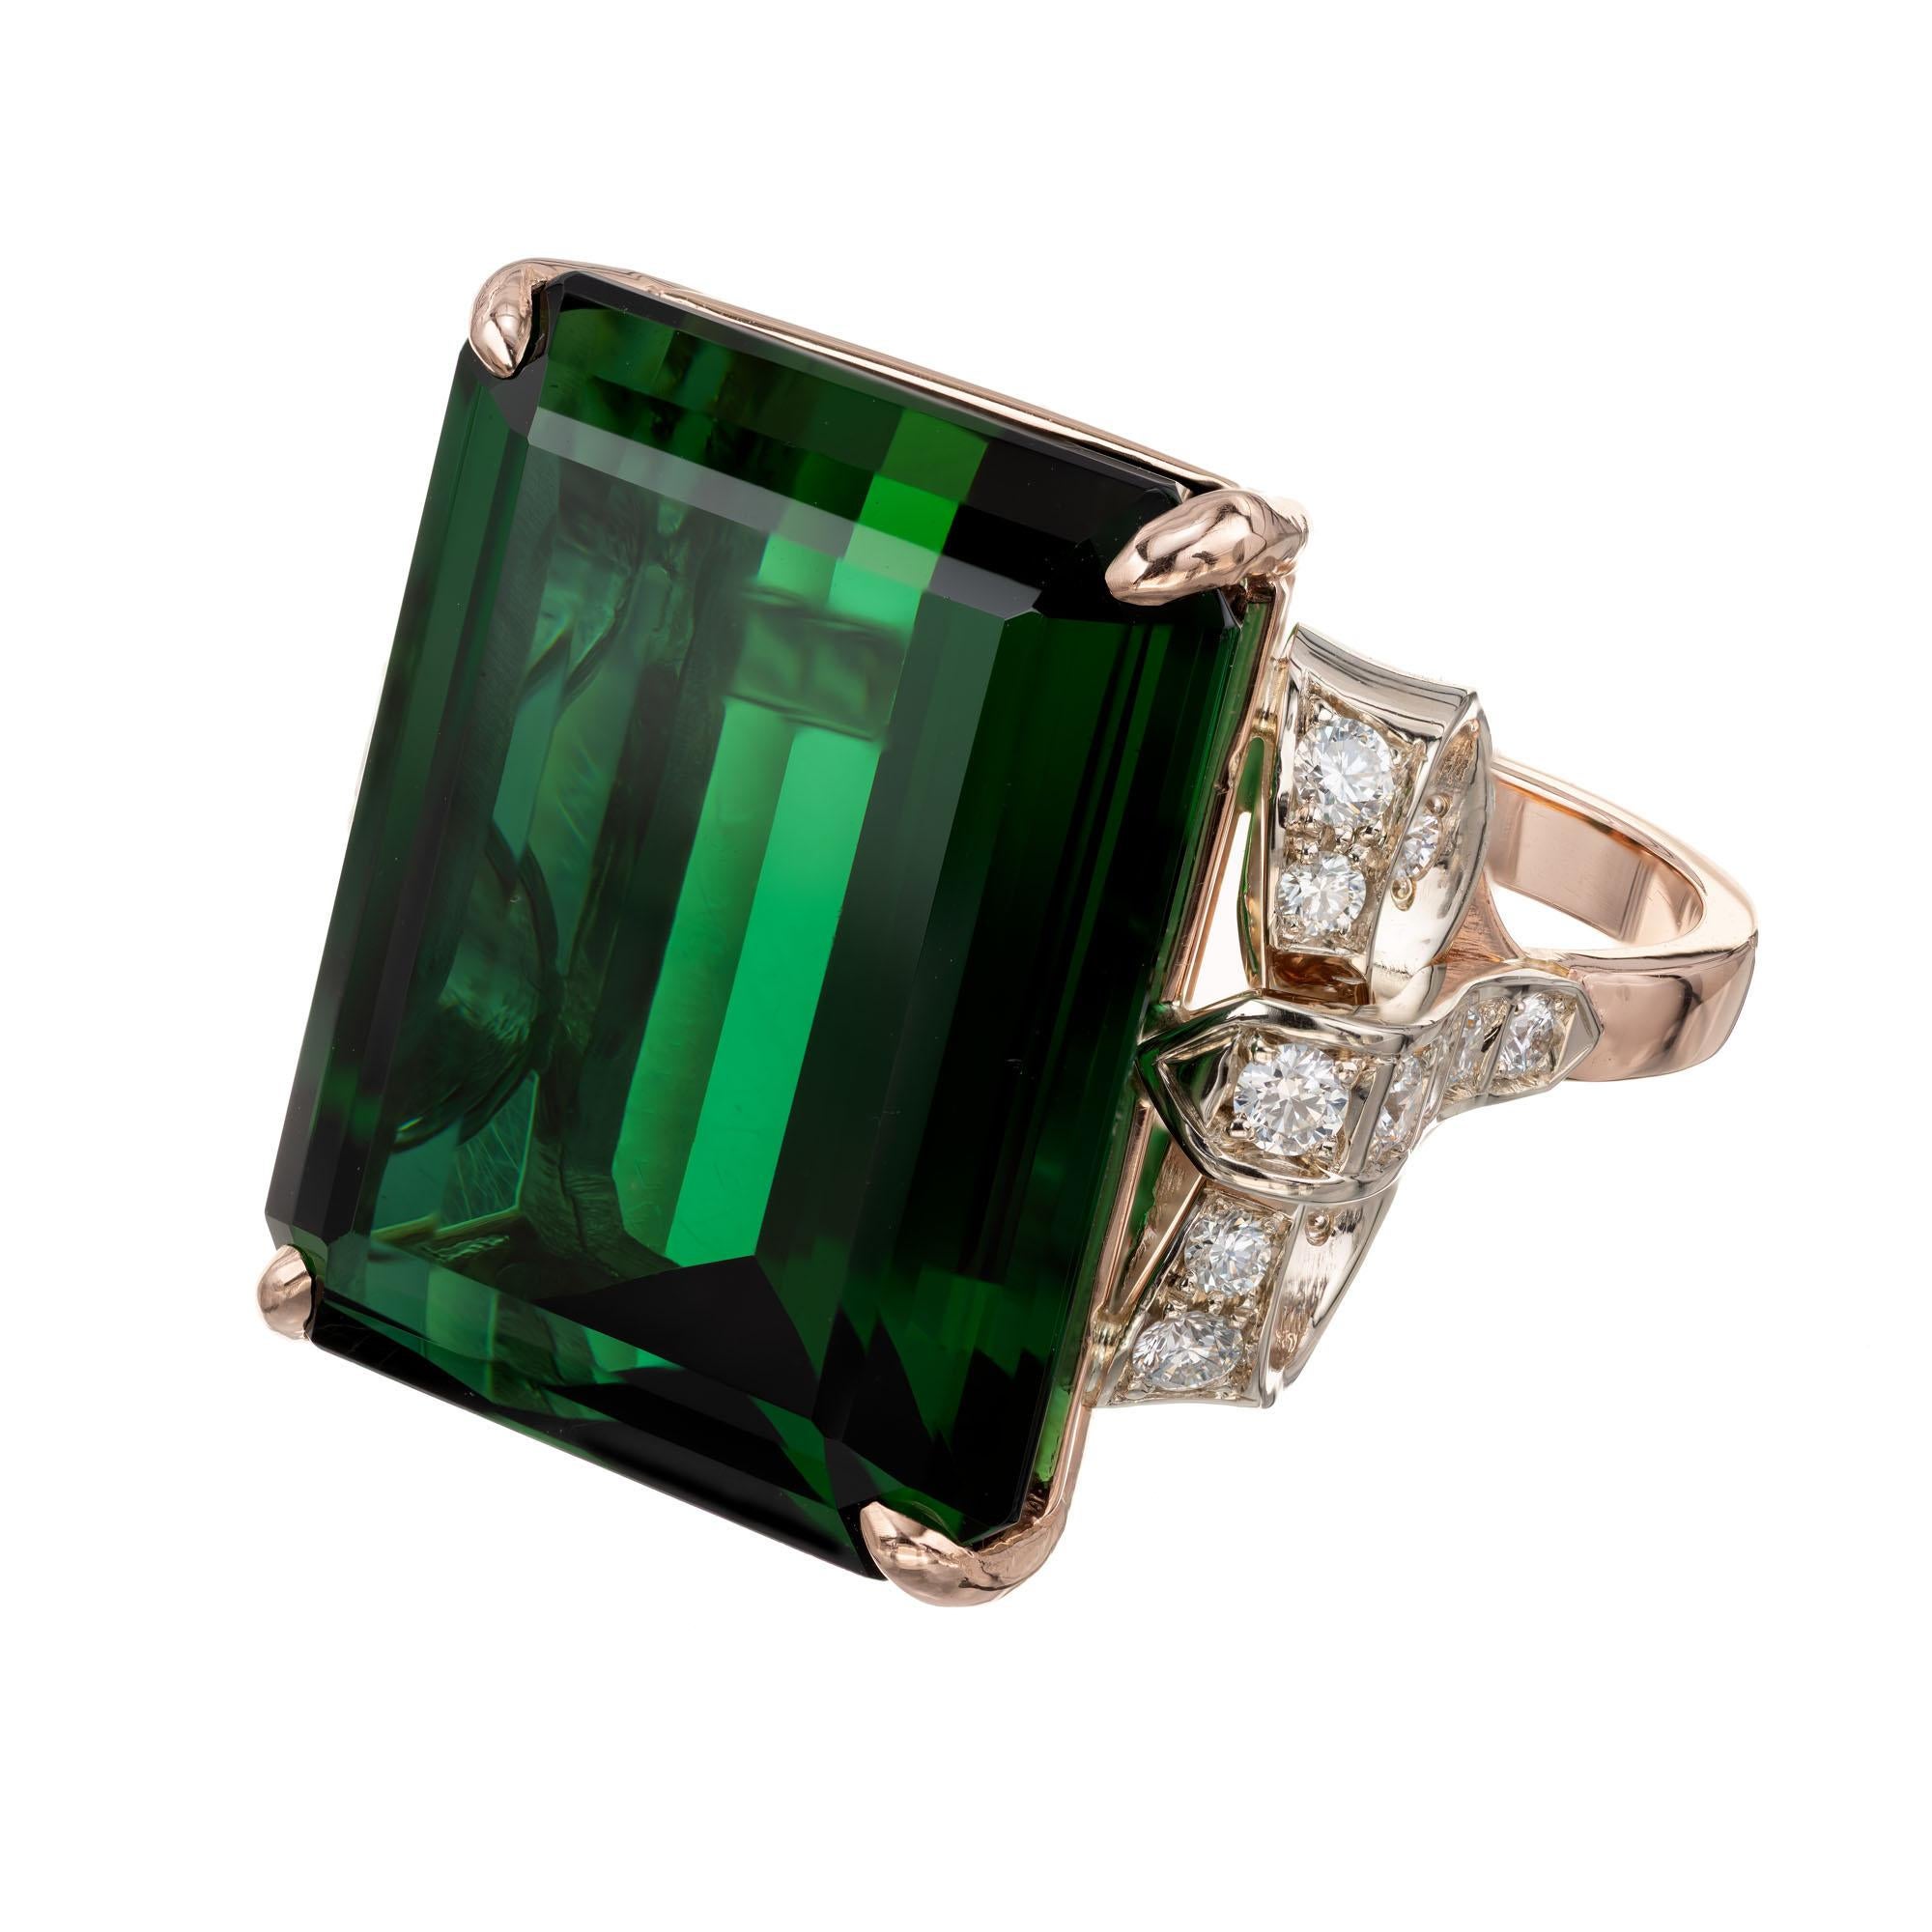 Peter Suchy vintage inspired 34.76 carat green tourmaline and diamond engagement ring. GIA certified dark green tourmaline center stone in a custom 14k rose and white gold bow setting, with 22 round accent diamonds, from the Peter Suchy Workshop

1